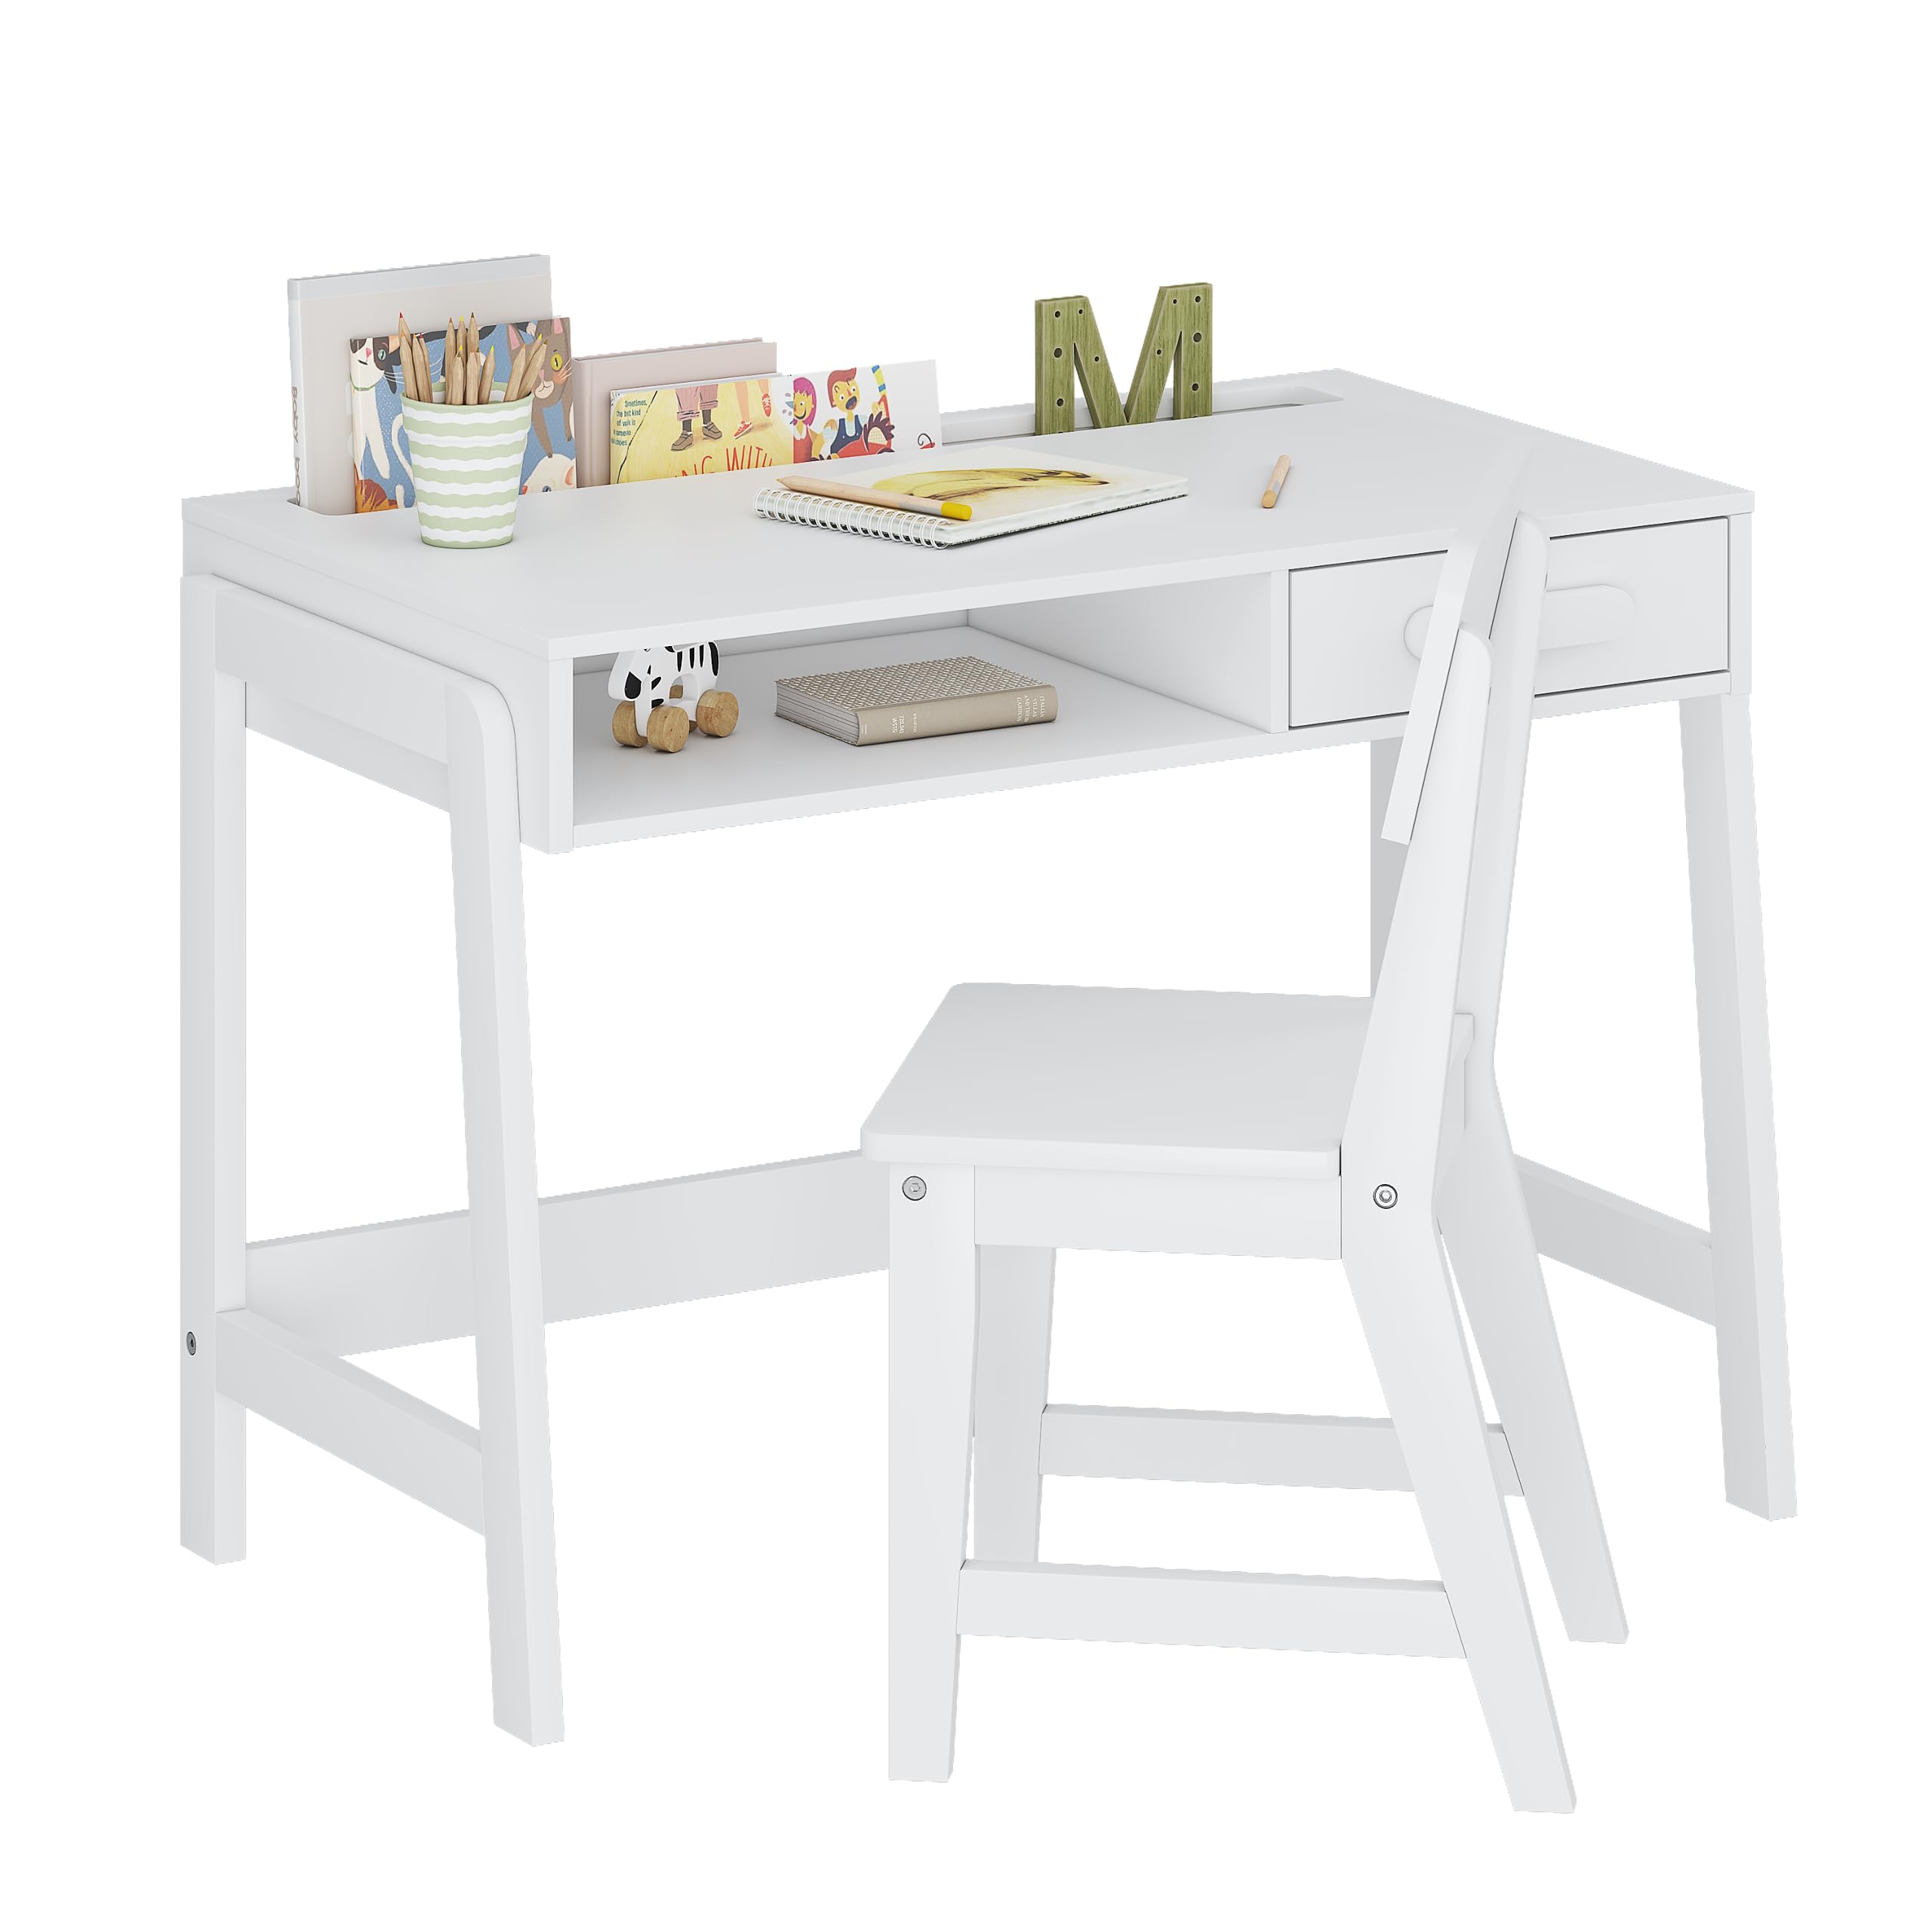 UTEX Kids Desk and Chair